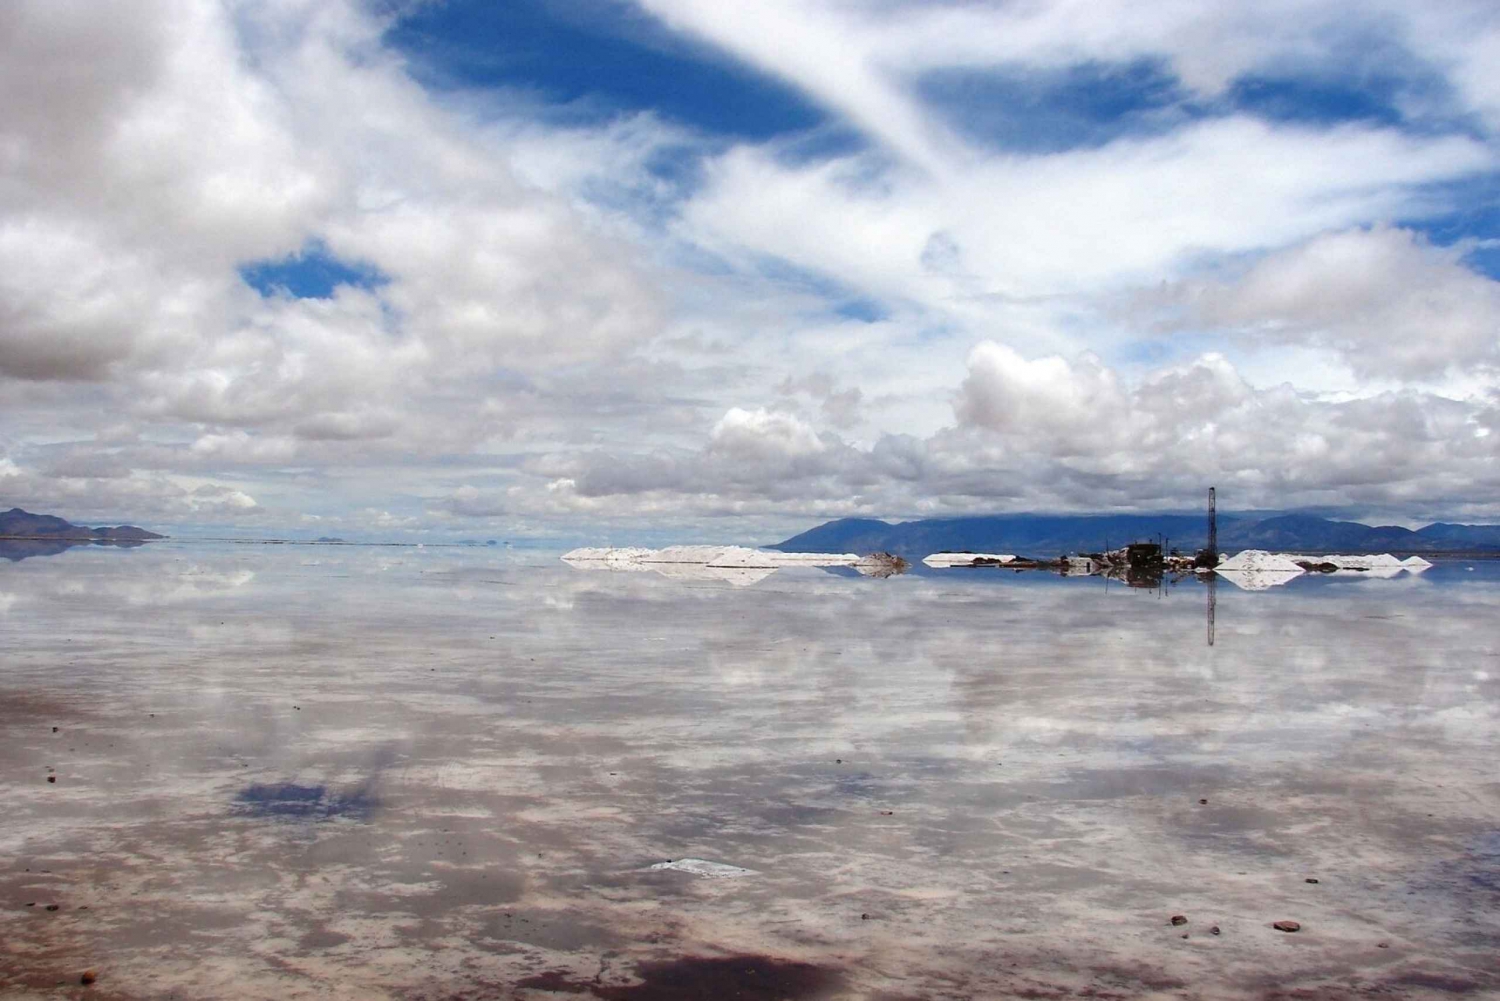 Back to the Heights: Great Salt Flats Tour